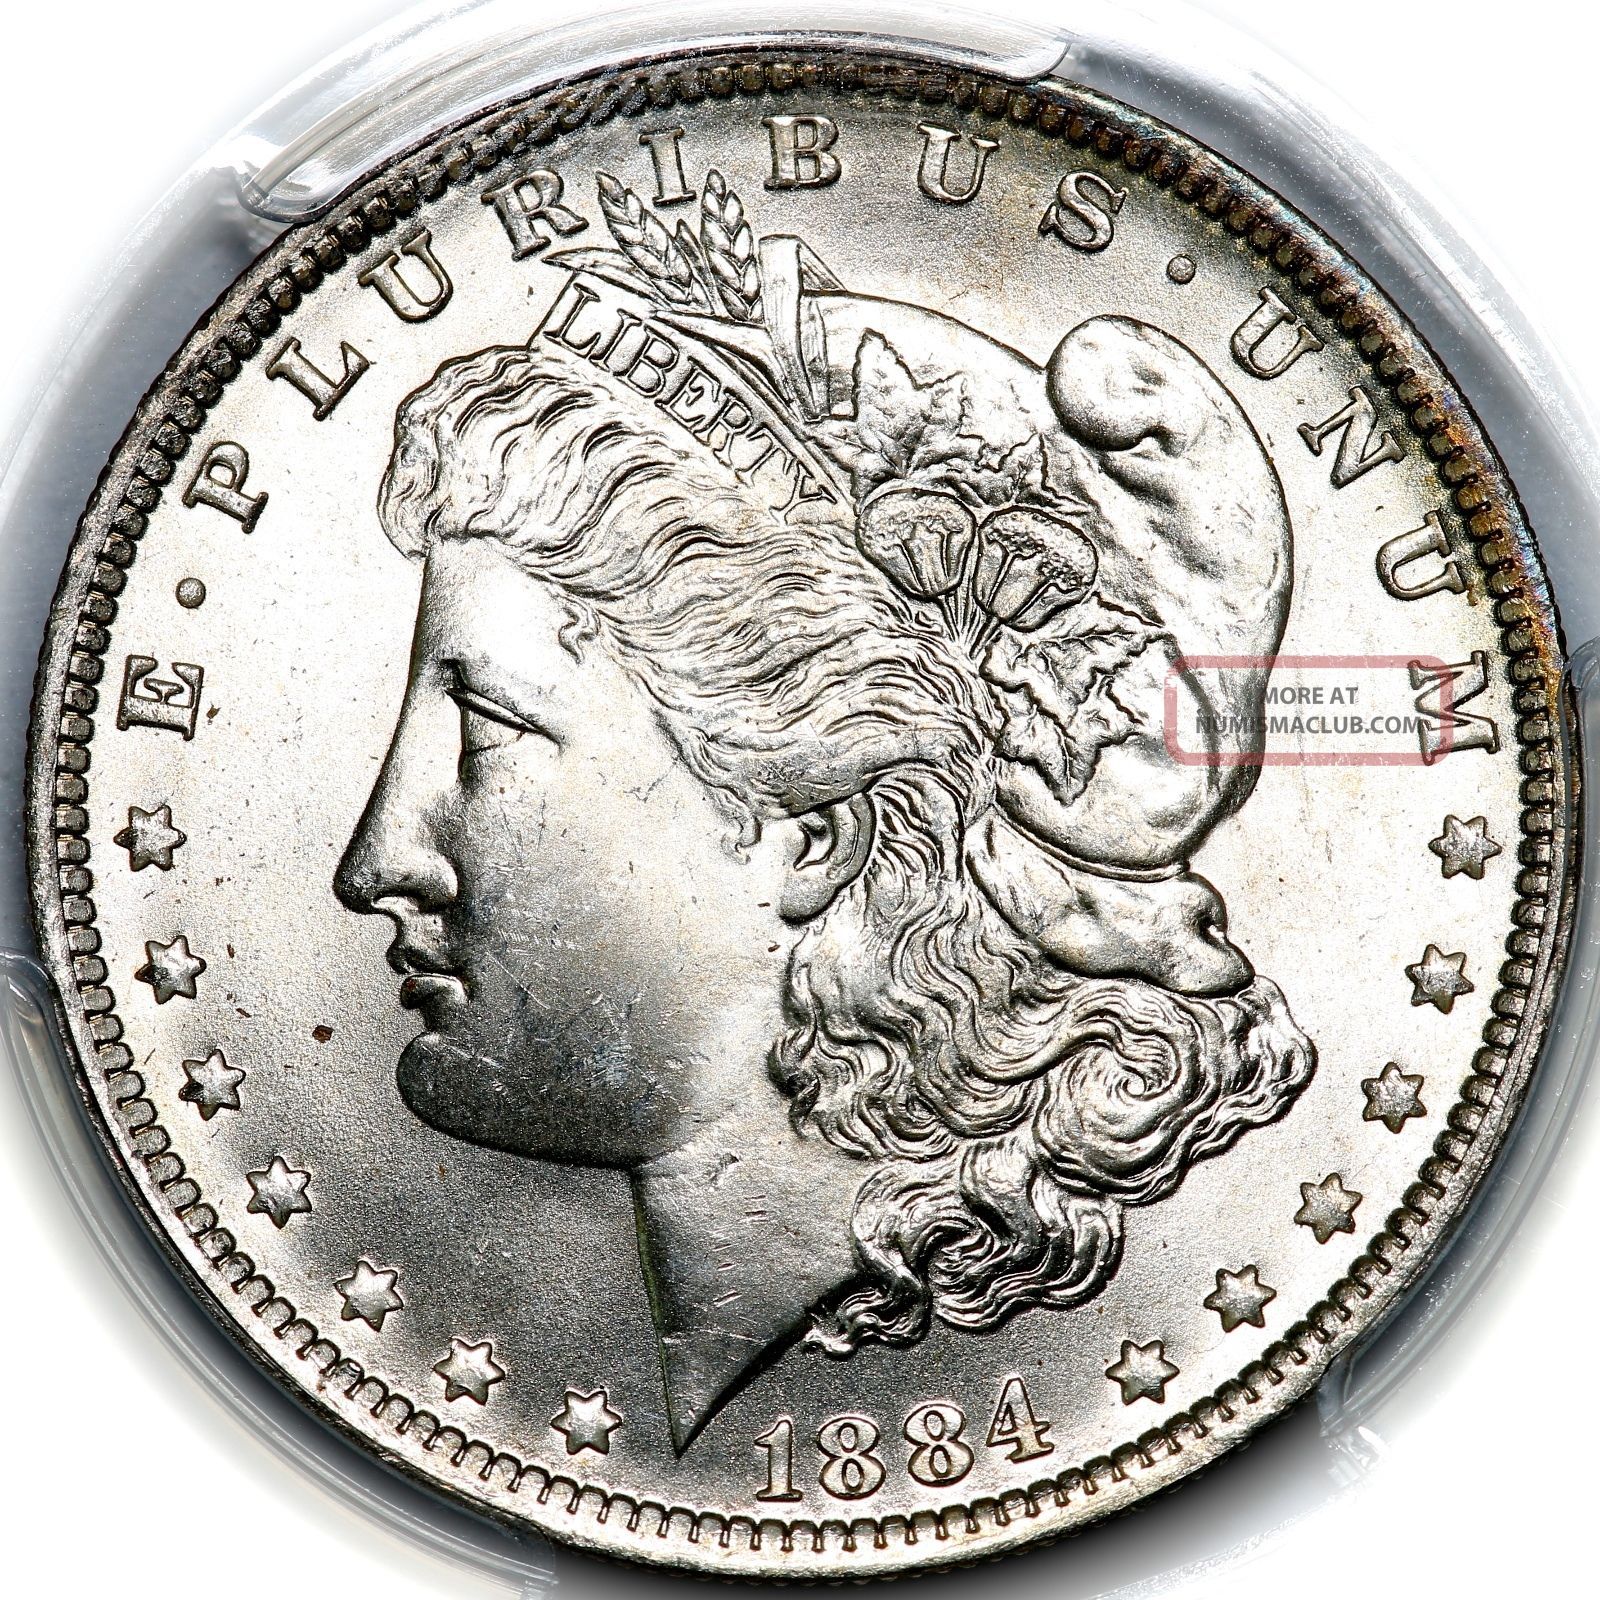 1884 O Liberty United States Orleans Silver Morgan Dollar $1 Coin Pcgs Ms65